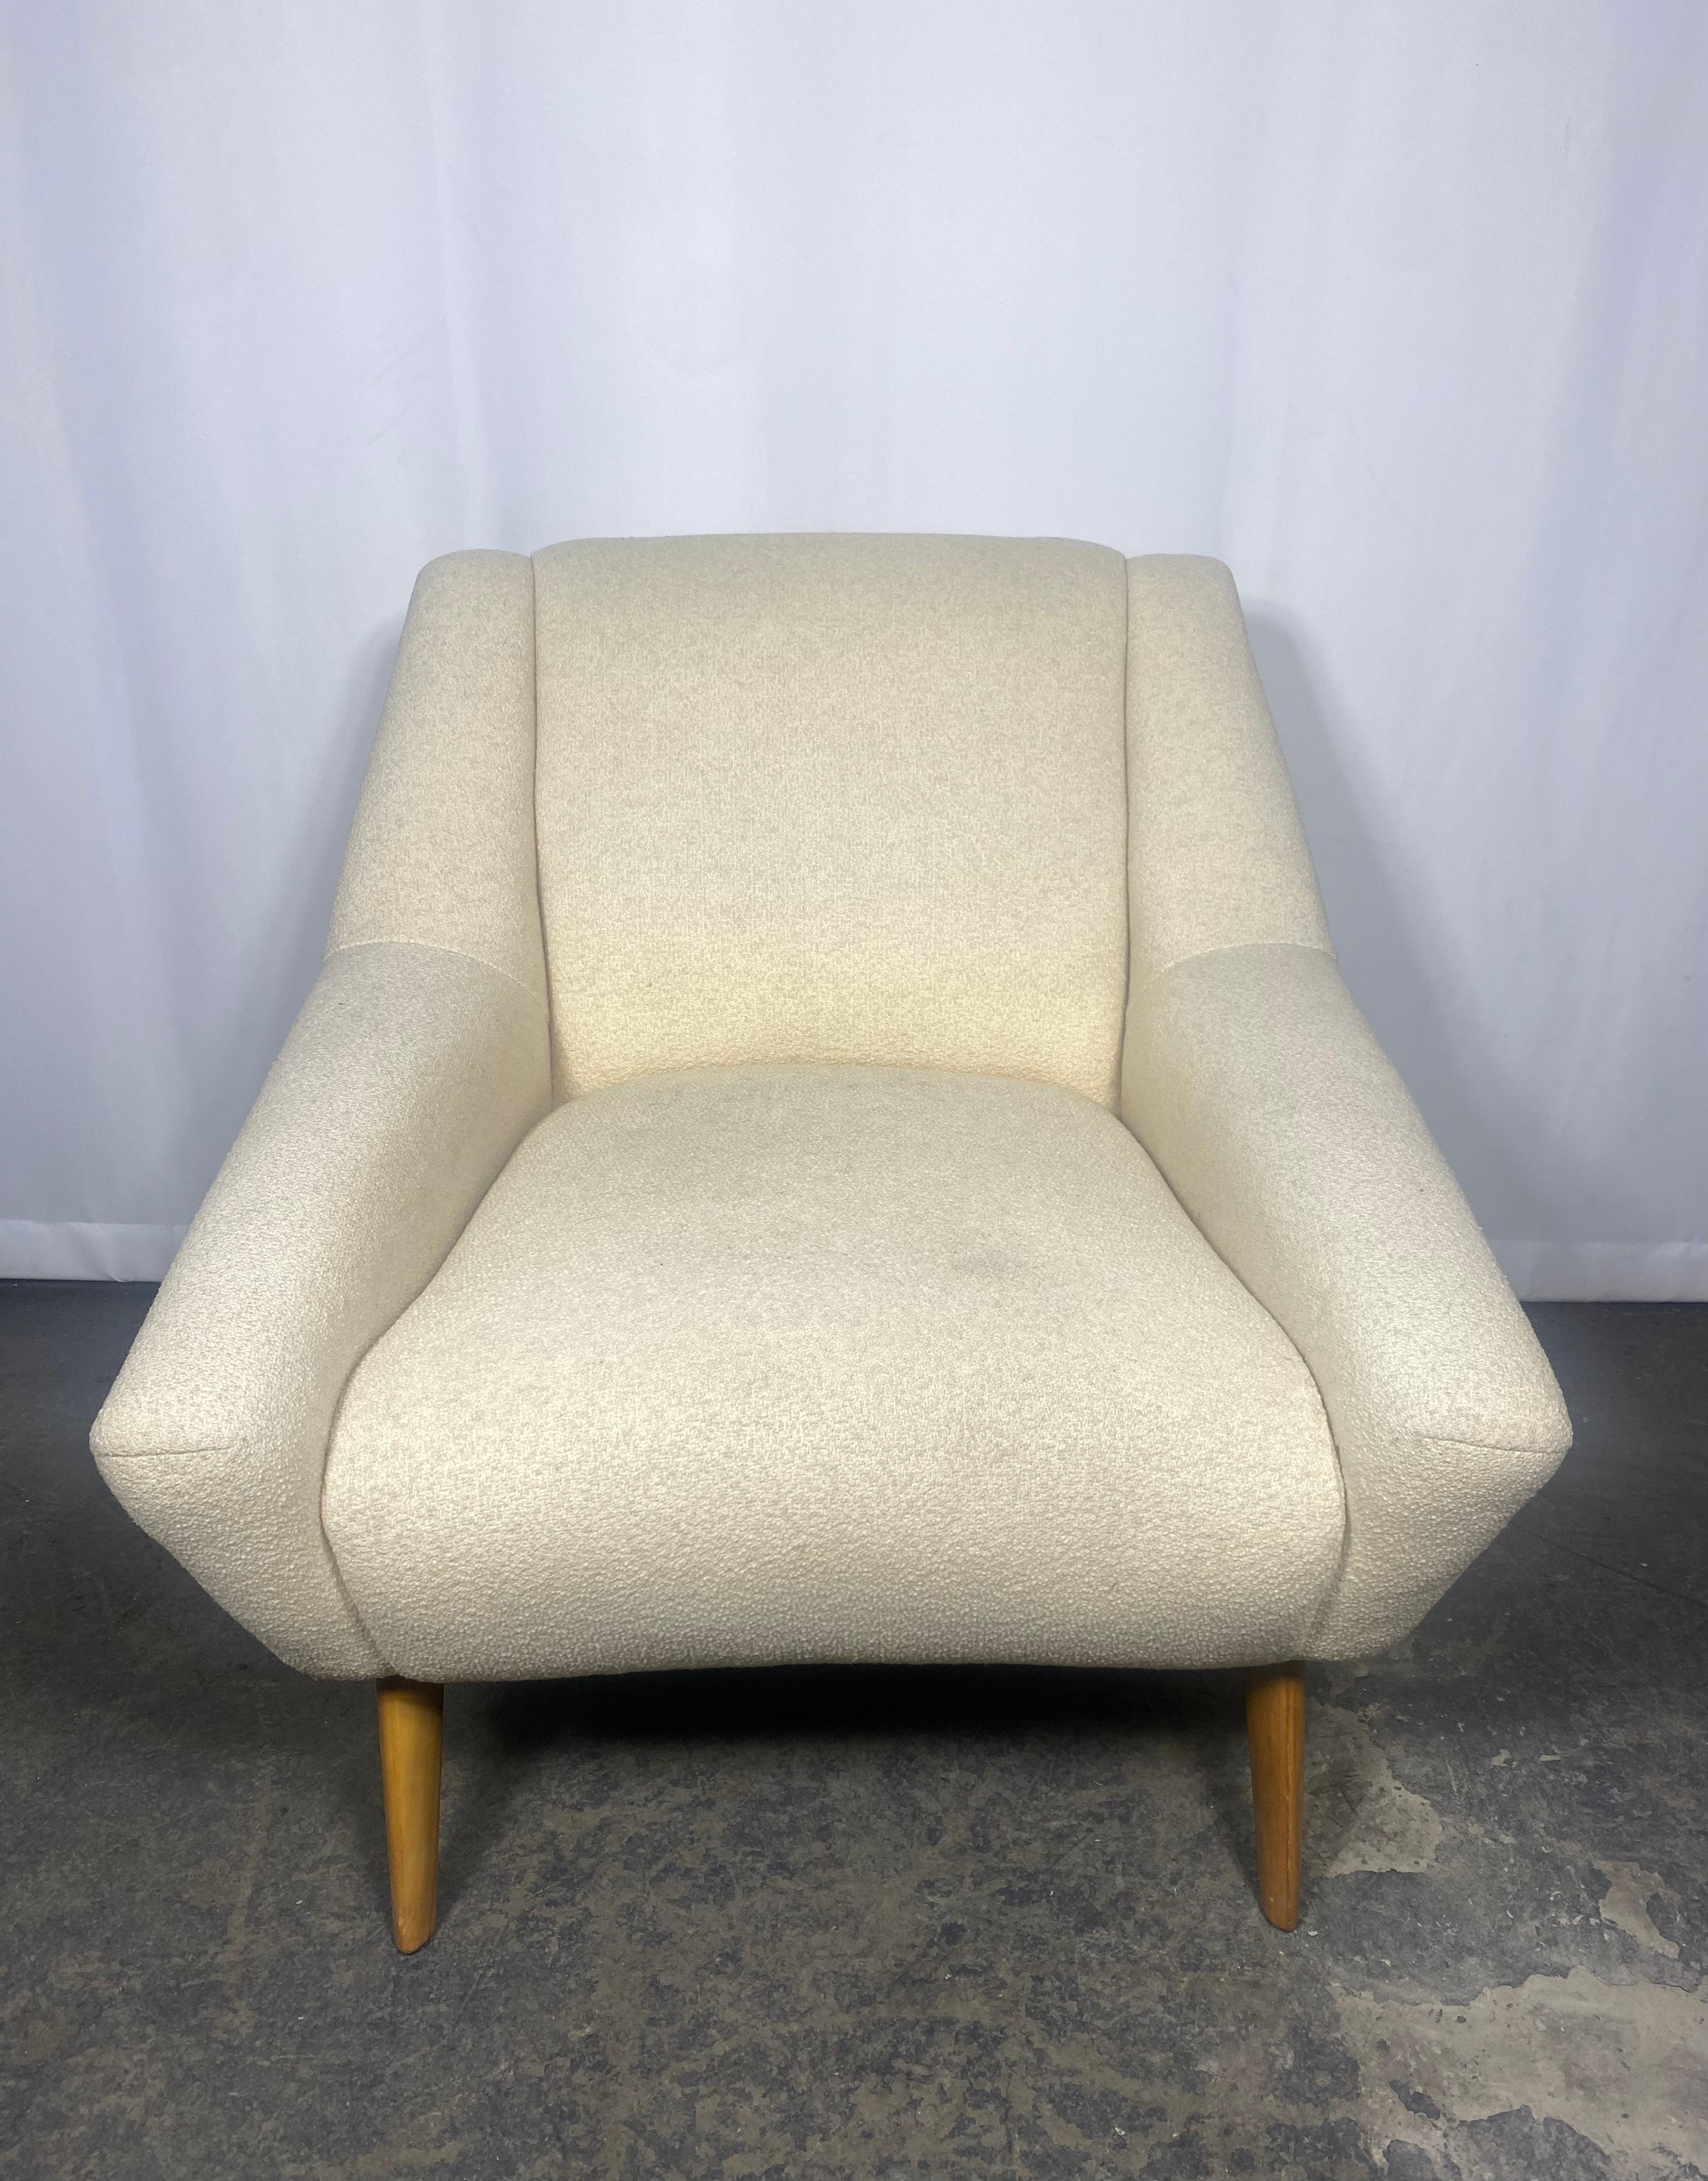 Classic Modernist Lounge Chair by Heywood Wakefield , after Gio Ponti For Sale 2